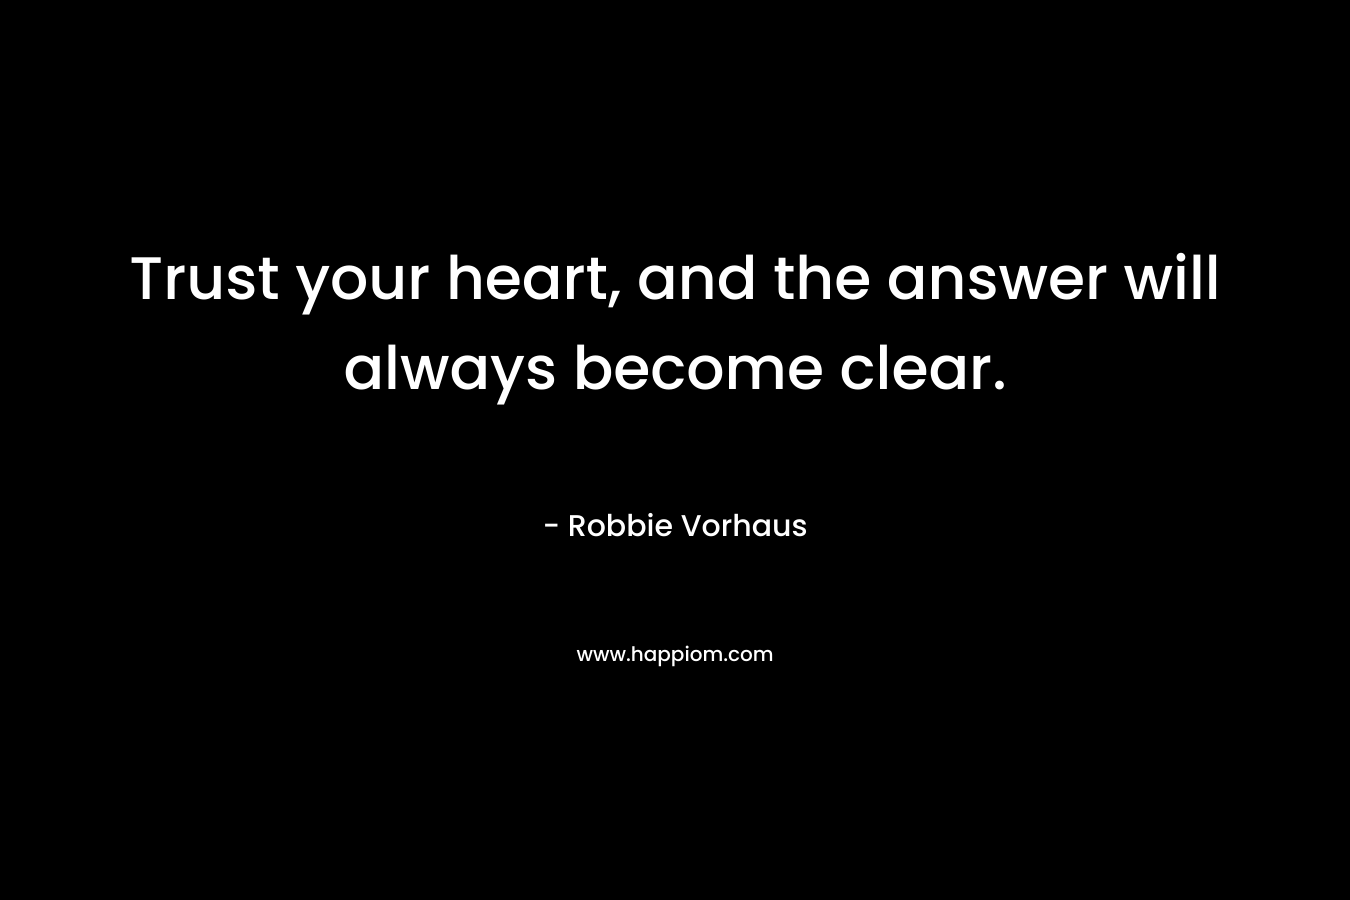 Trust your heart, and the answer will always become clear.